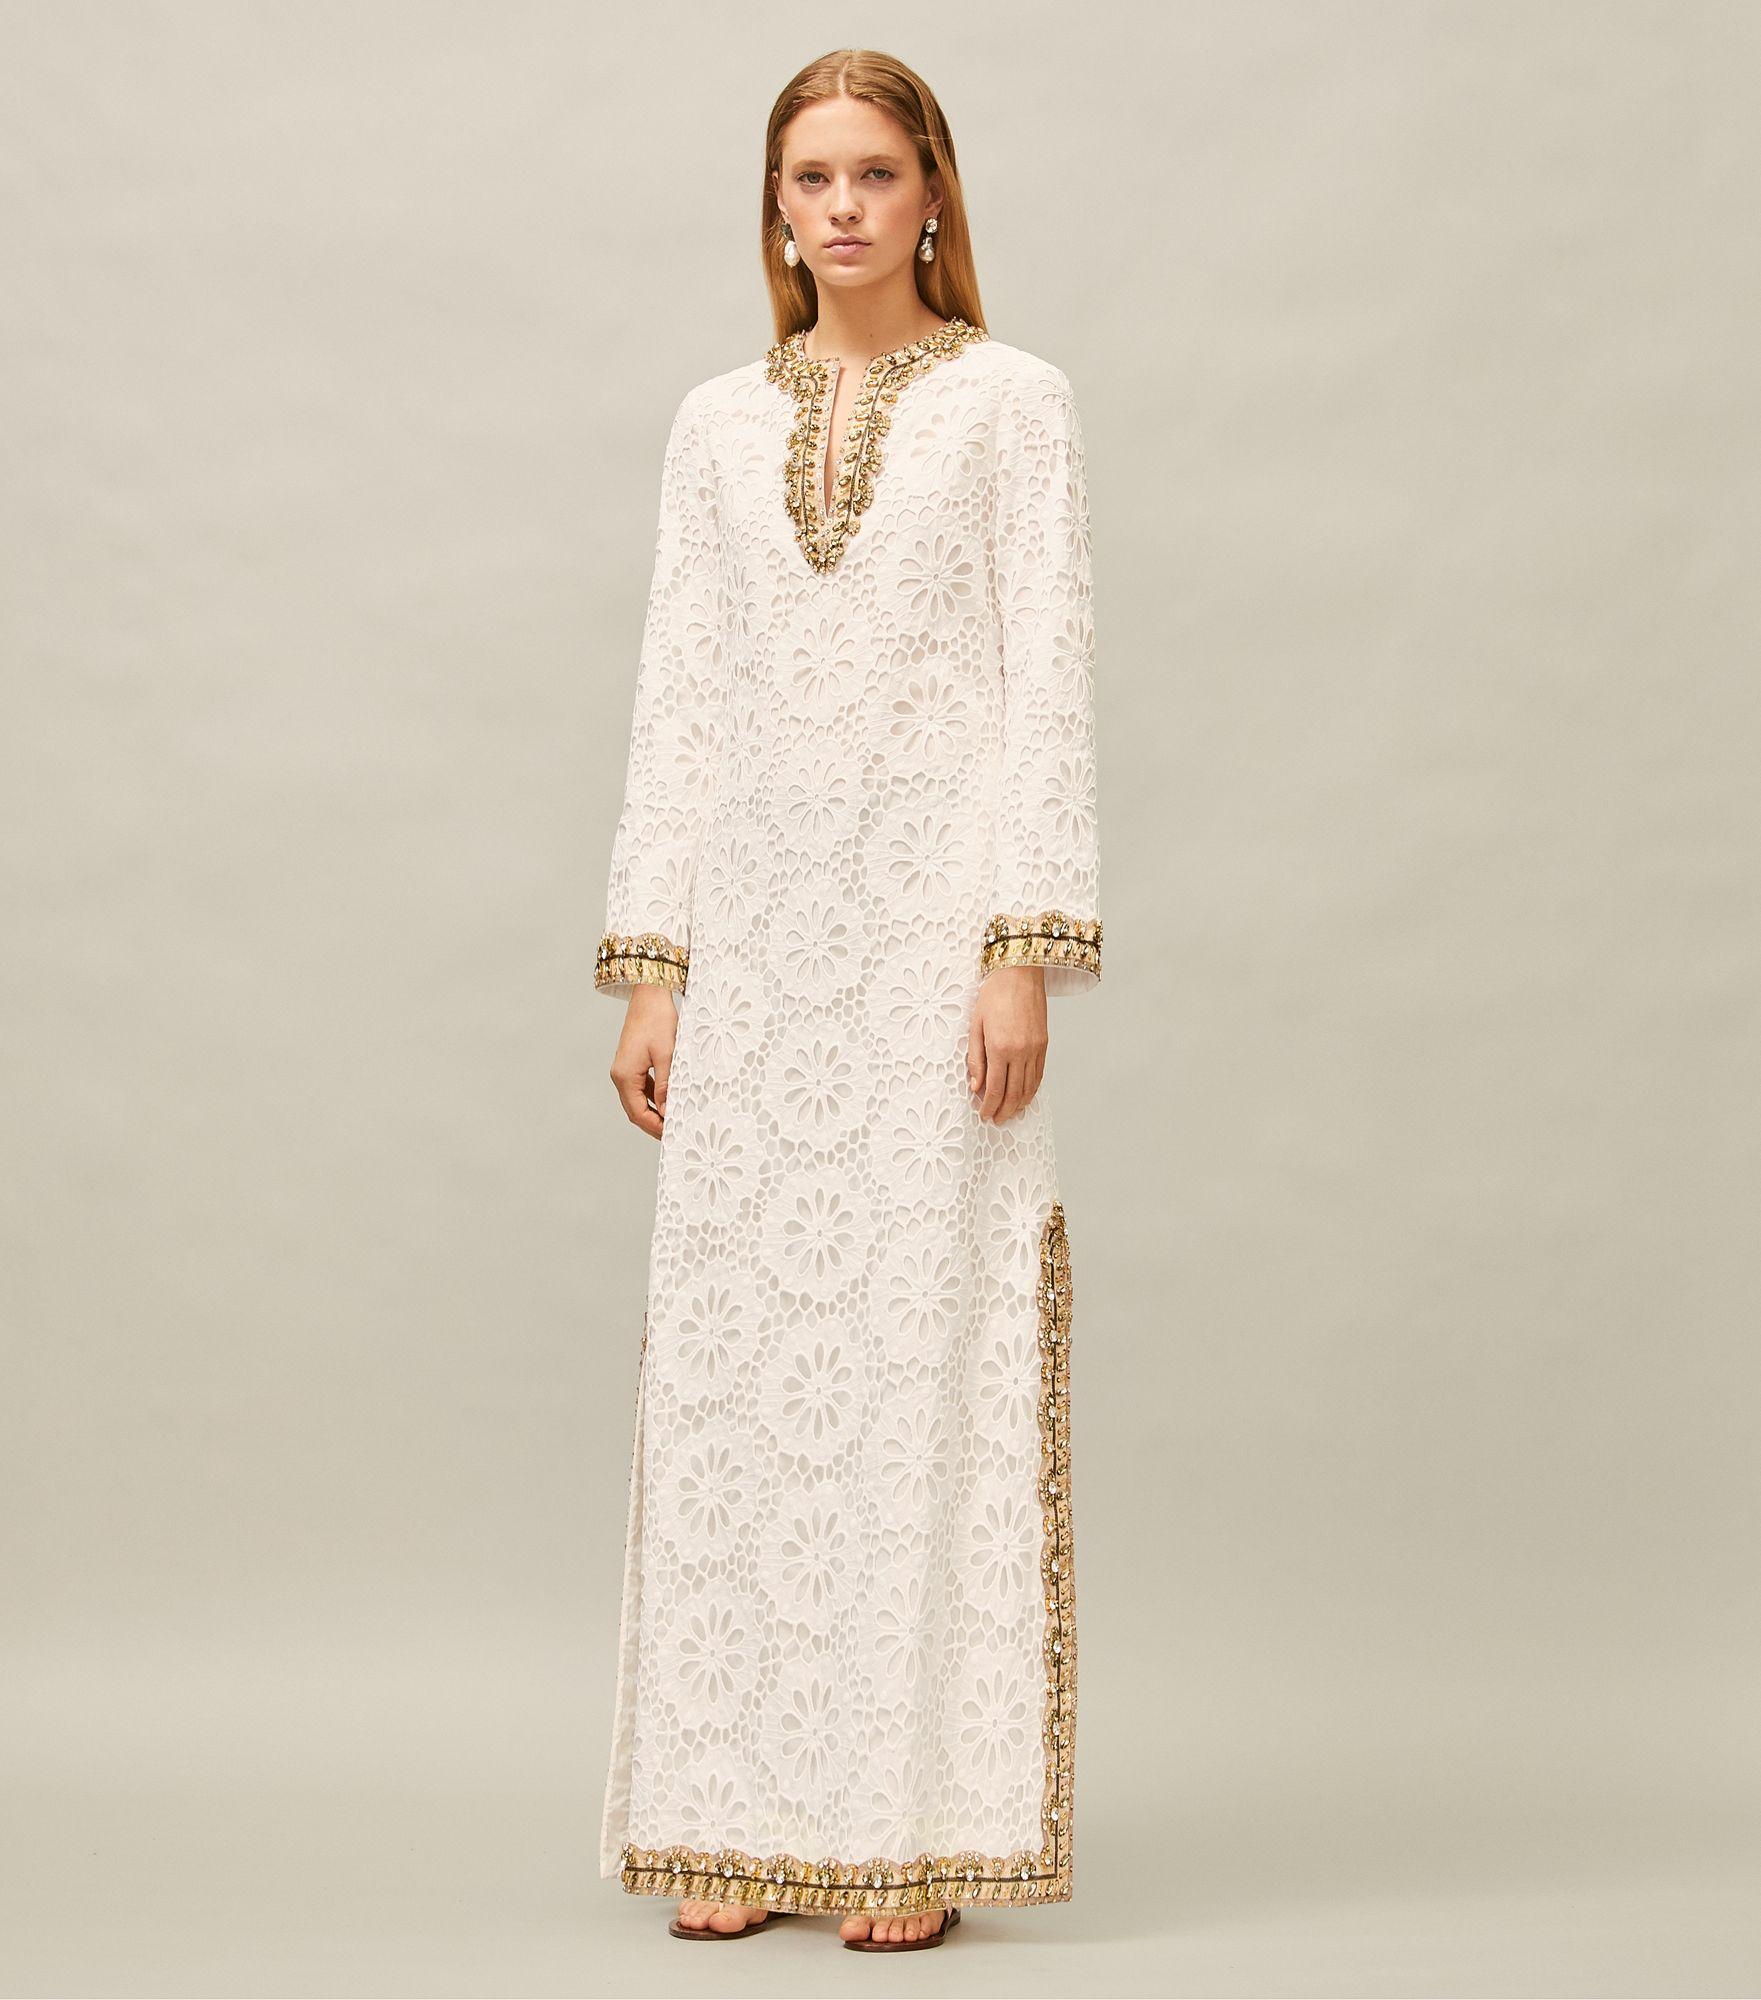 Tory Burch Embellished Lace Caftan Dress in White | Lyst